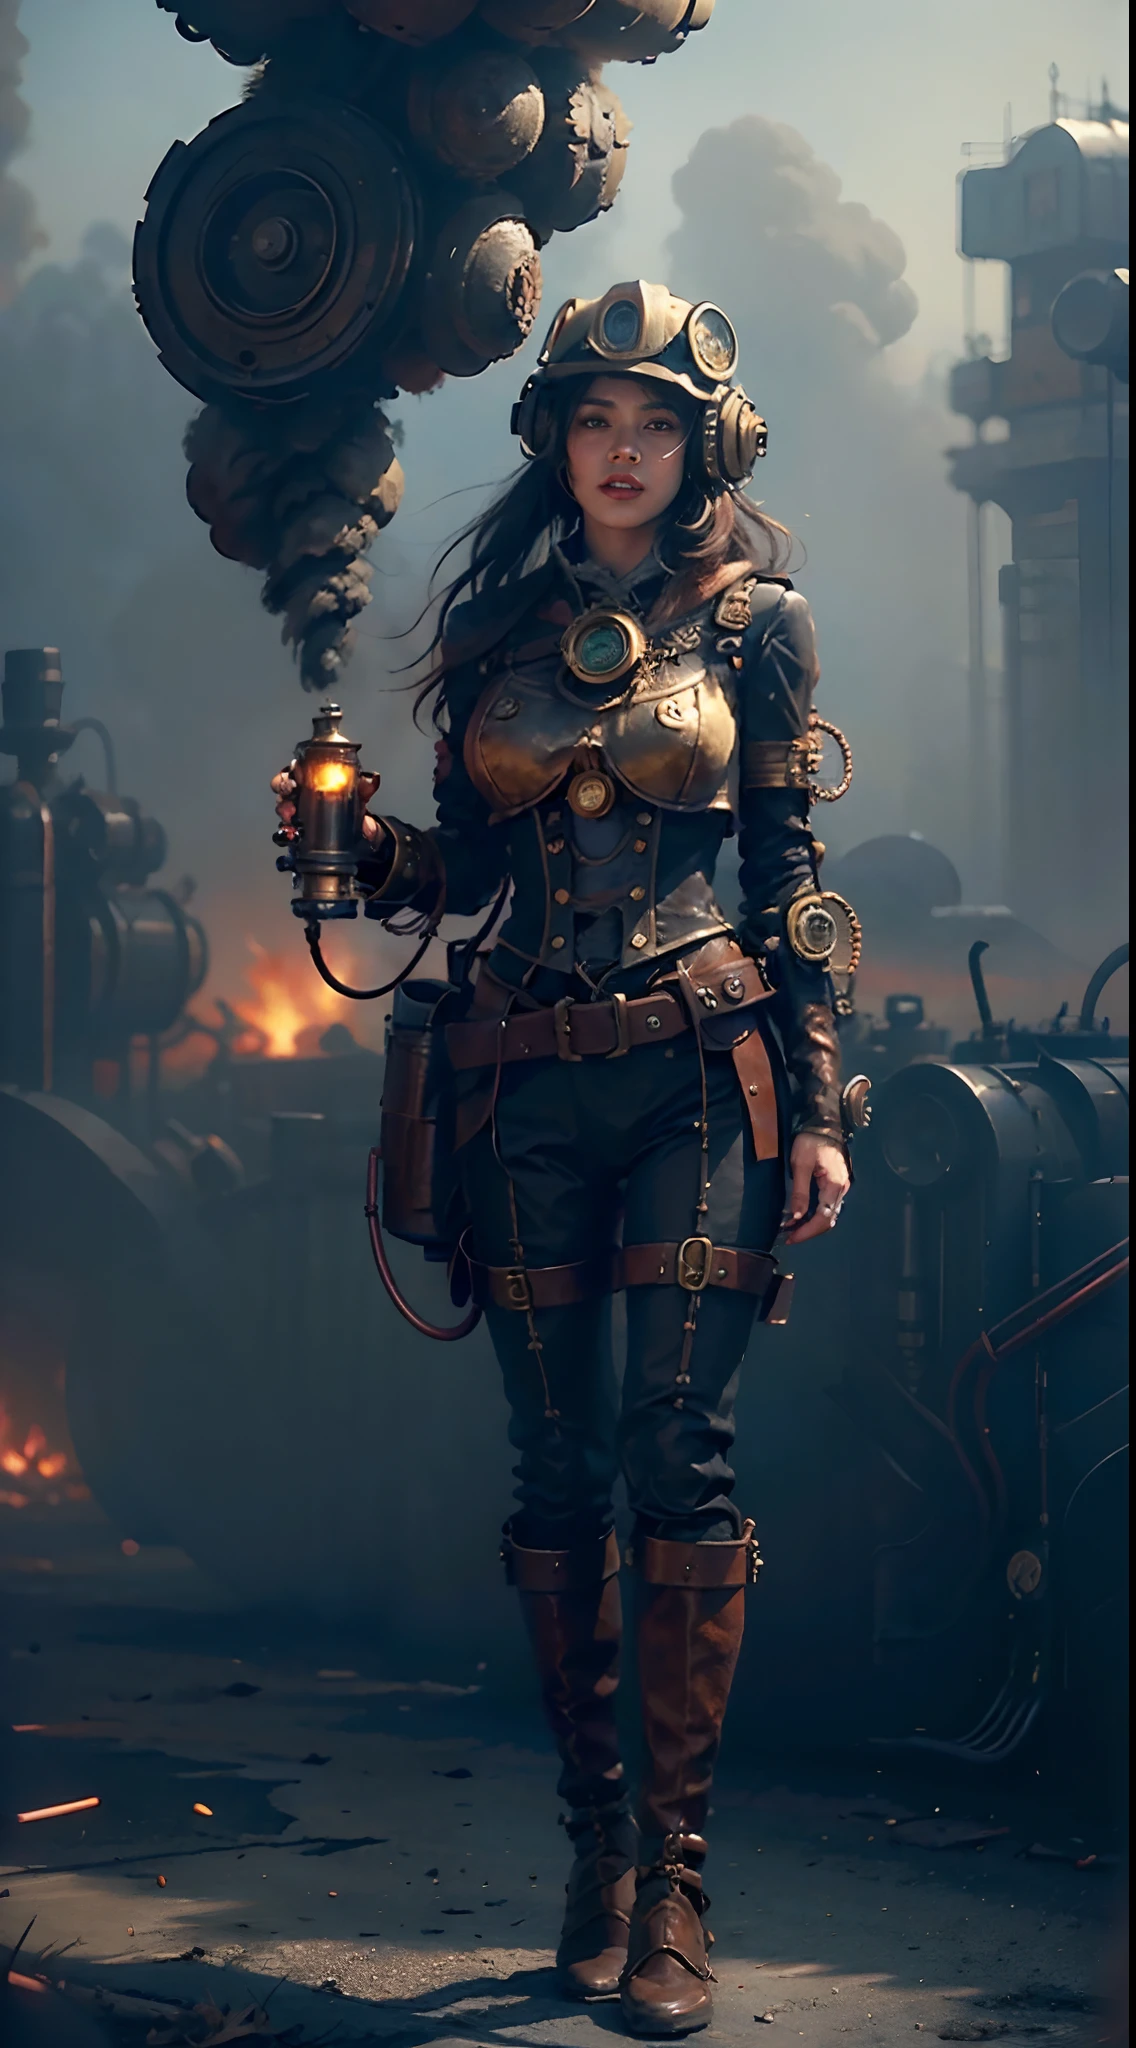 There's a muscled 1woman with a steam-powered dusky skin, with small ,Royal look,helmet, arte conceitual steampunk, sexzy full body view top to bottom, standing front view ,dark smoke fog background, arte steampunk digital, arte steampunk de alta qualidade, Wojtek FUS, arte digital steampunk, detailed wild steampunk illustration, Portrait of a gold and copper mechanical woman, arte steampunk, estilo de arte dieselpunk, cyberpunk steampunk, estilo de fantasia steampunk, Arte digital altamente detalhada em 4k, sci-fi steampunk